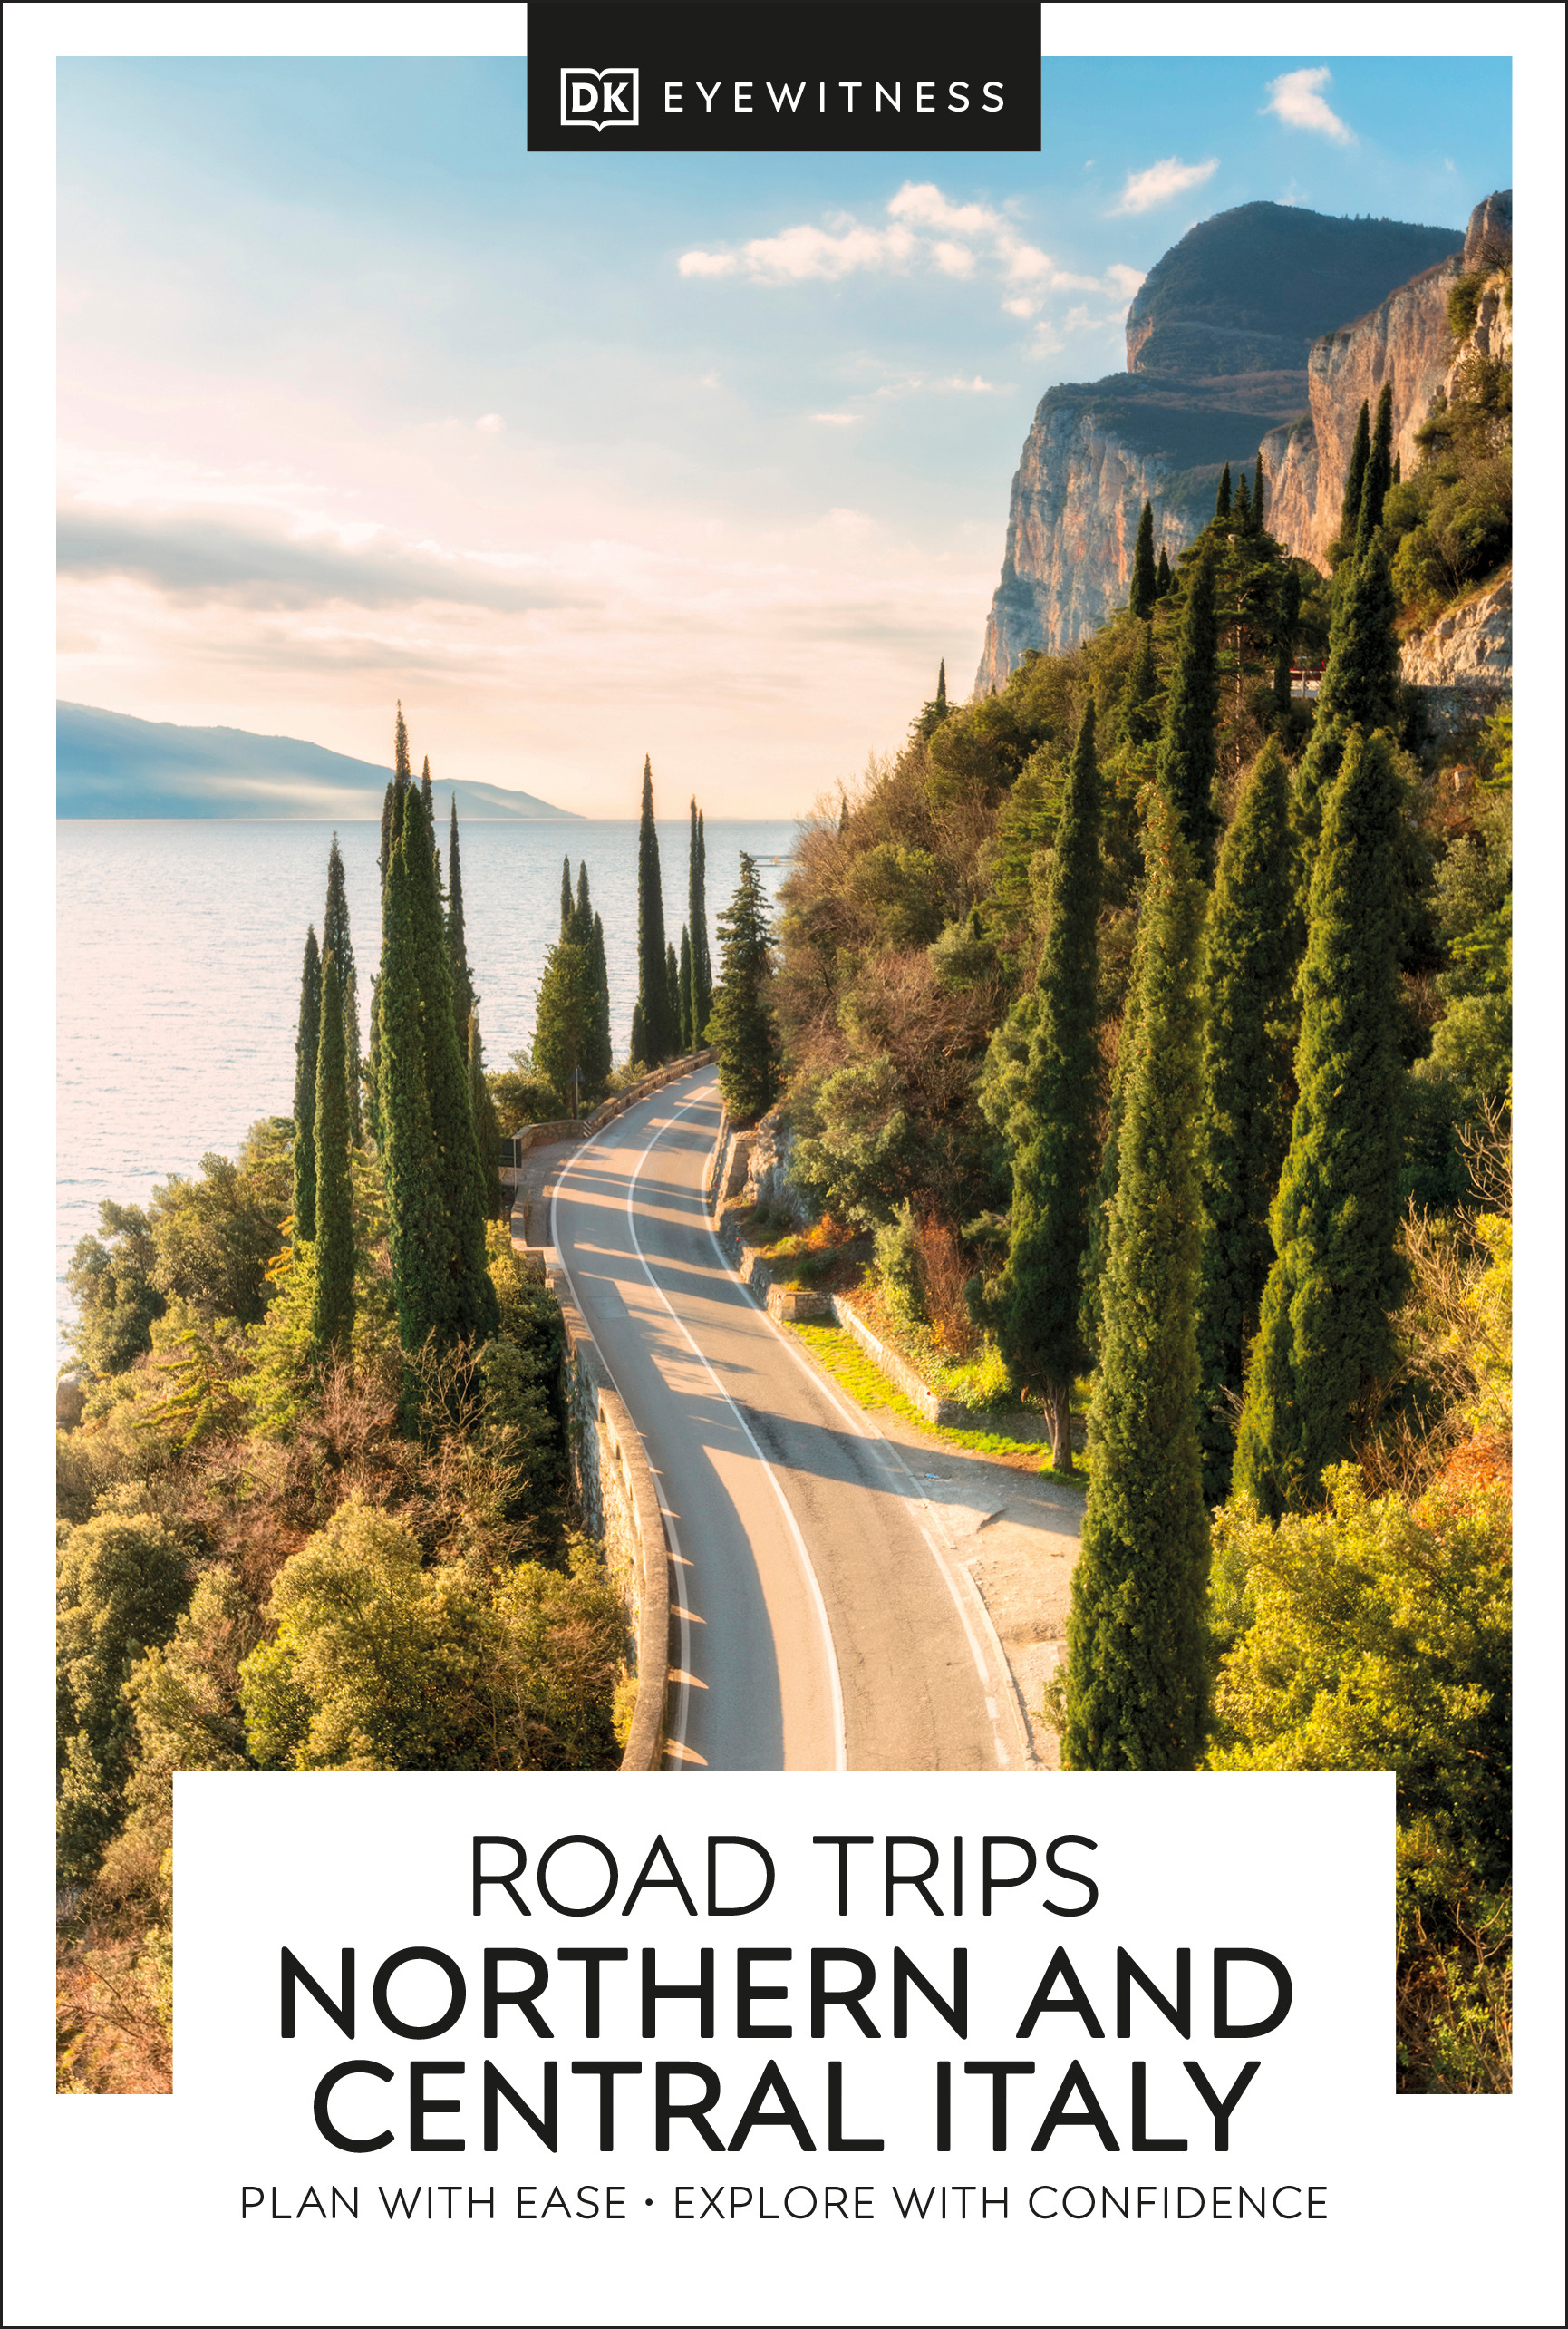 DK Eyewitness Road Trips Northern &amp; Central Italy | 